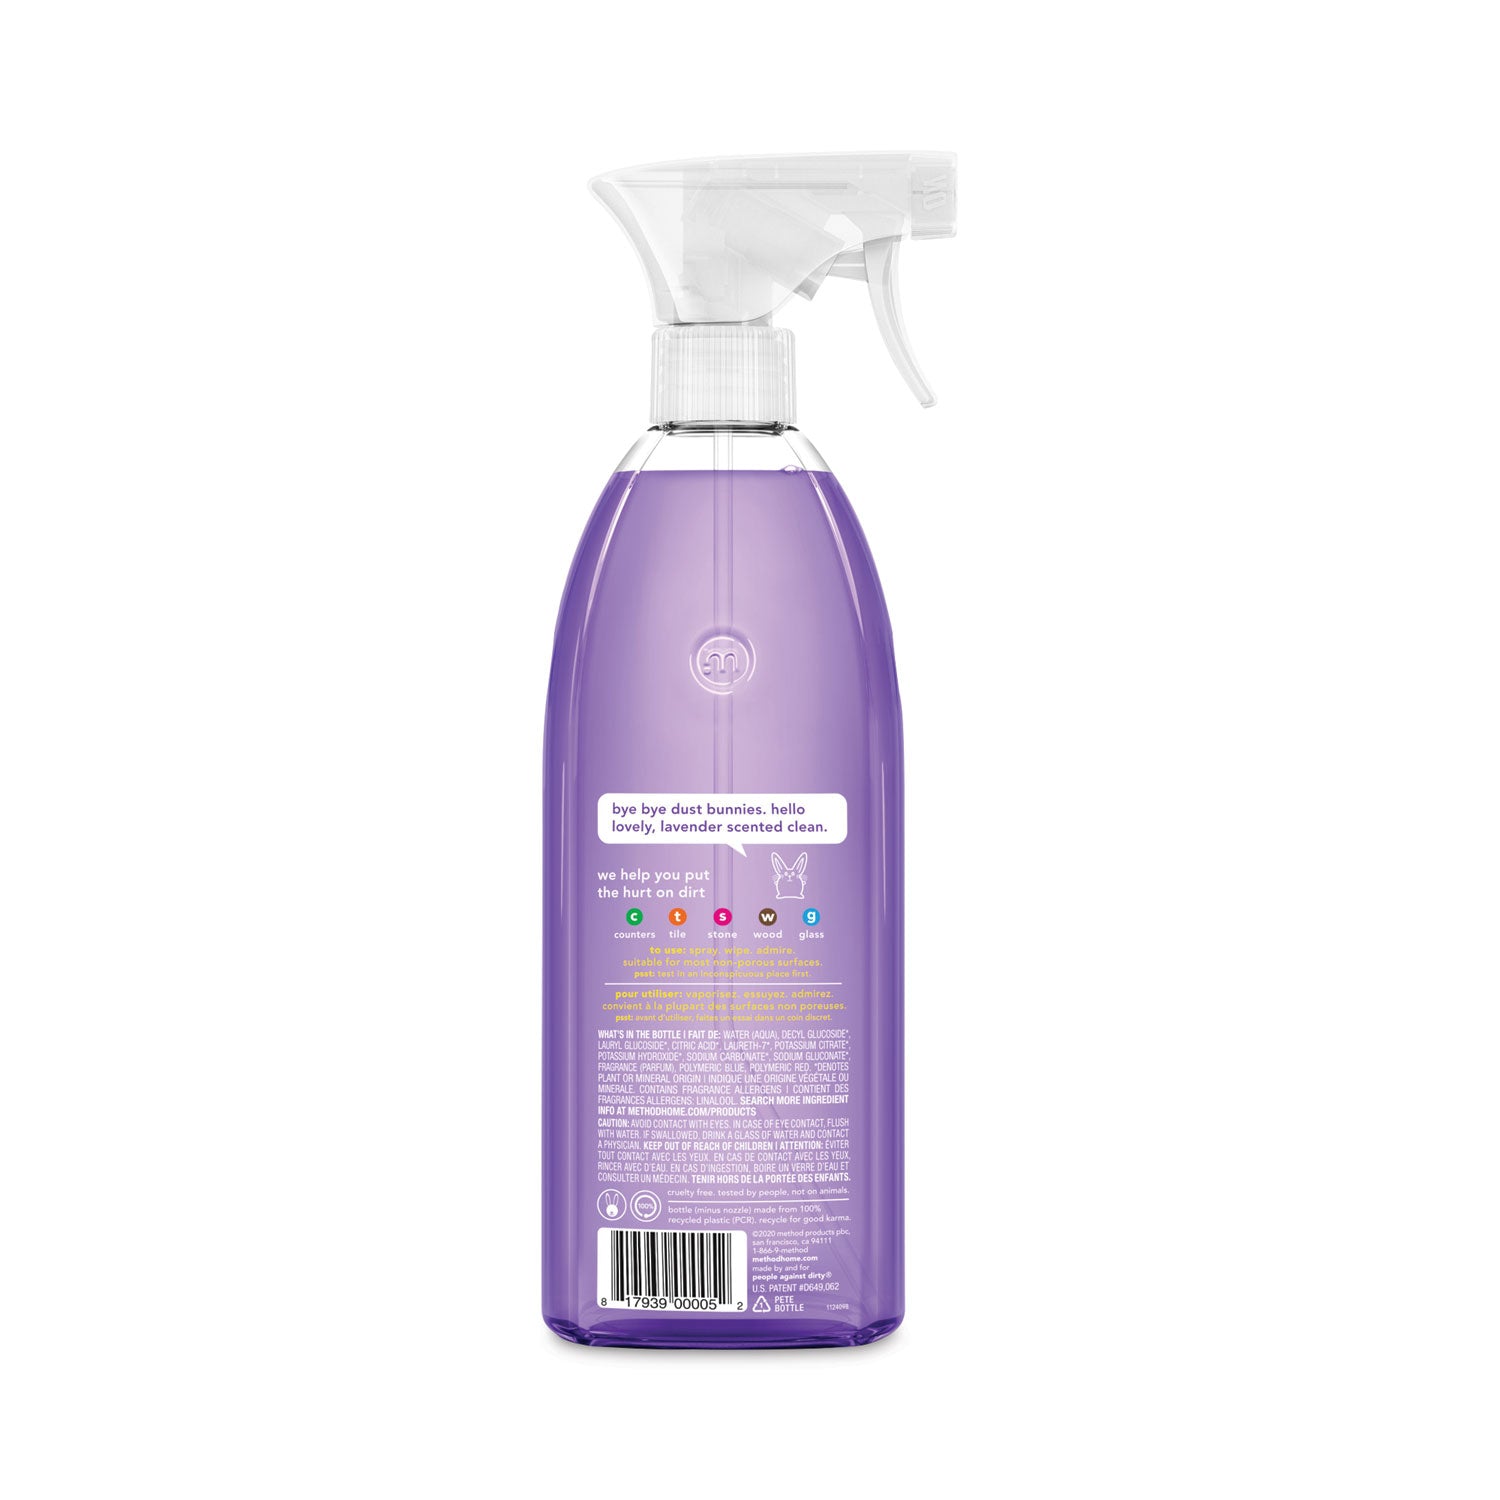 all-surface-cleaner-french-lavender-28-oz-spray-bottle-8-carton_mth00005ct - 2